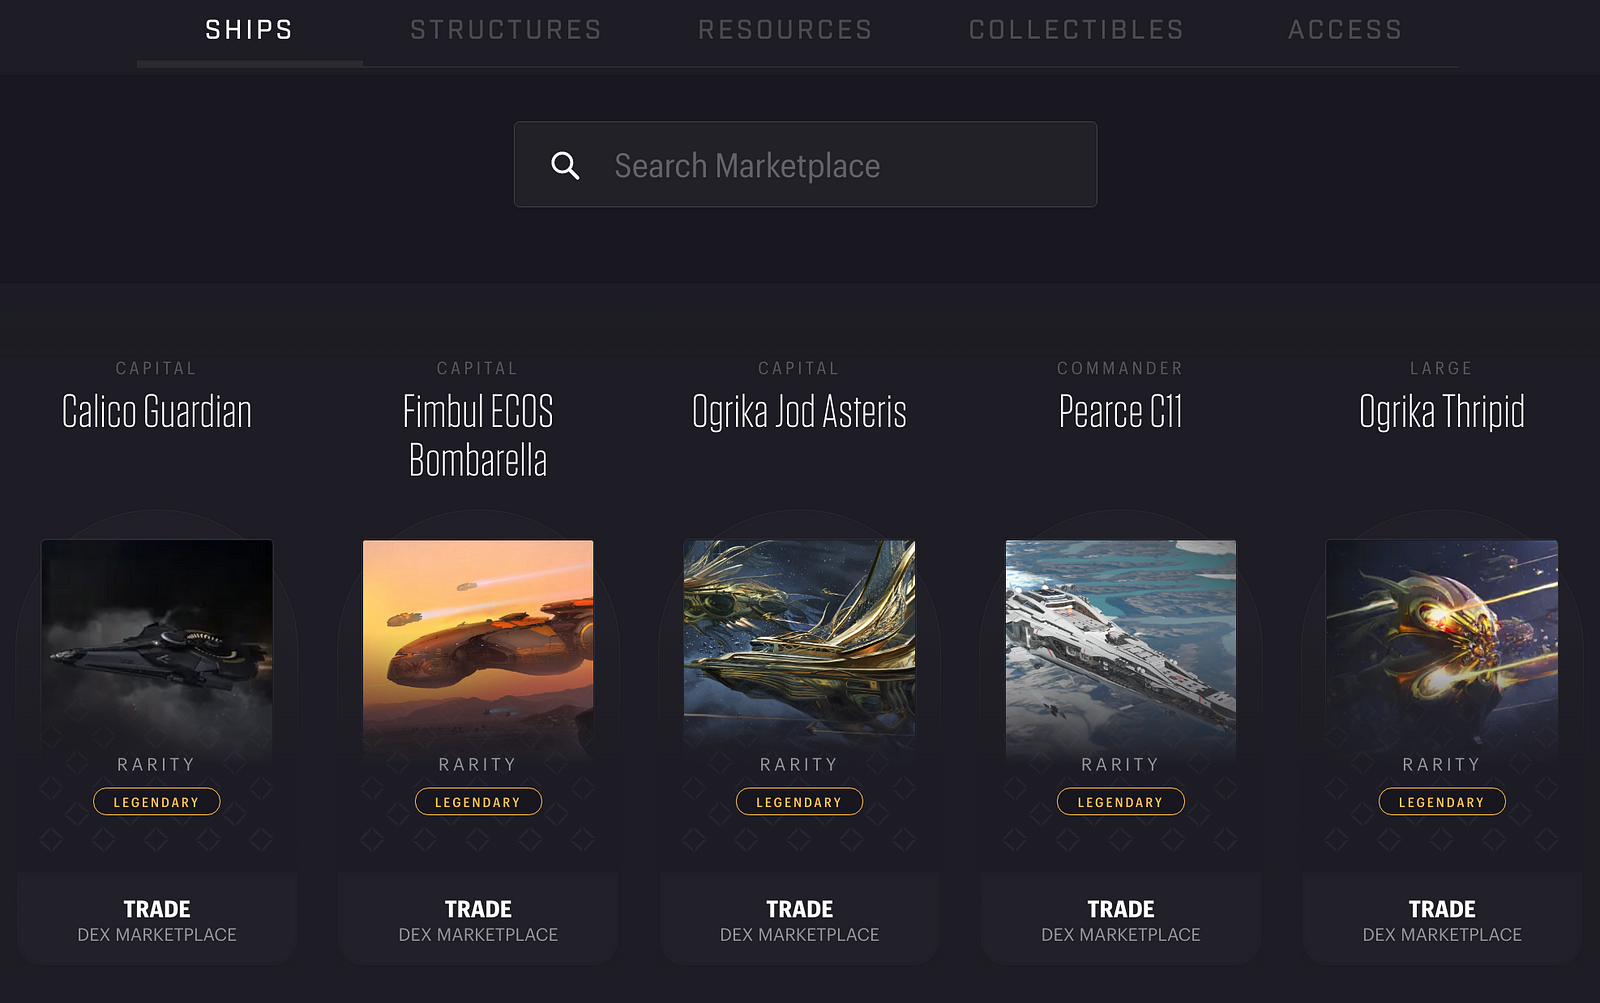 Old Marketplace, showing categories, search bar and 5 ships